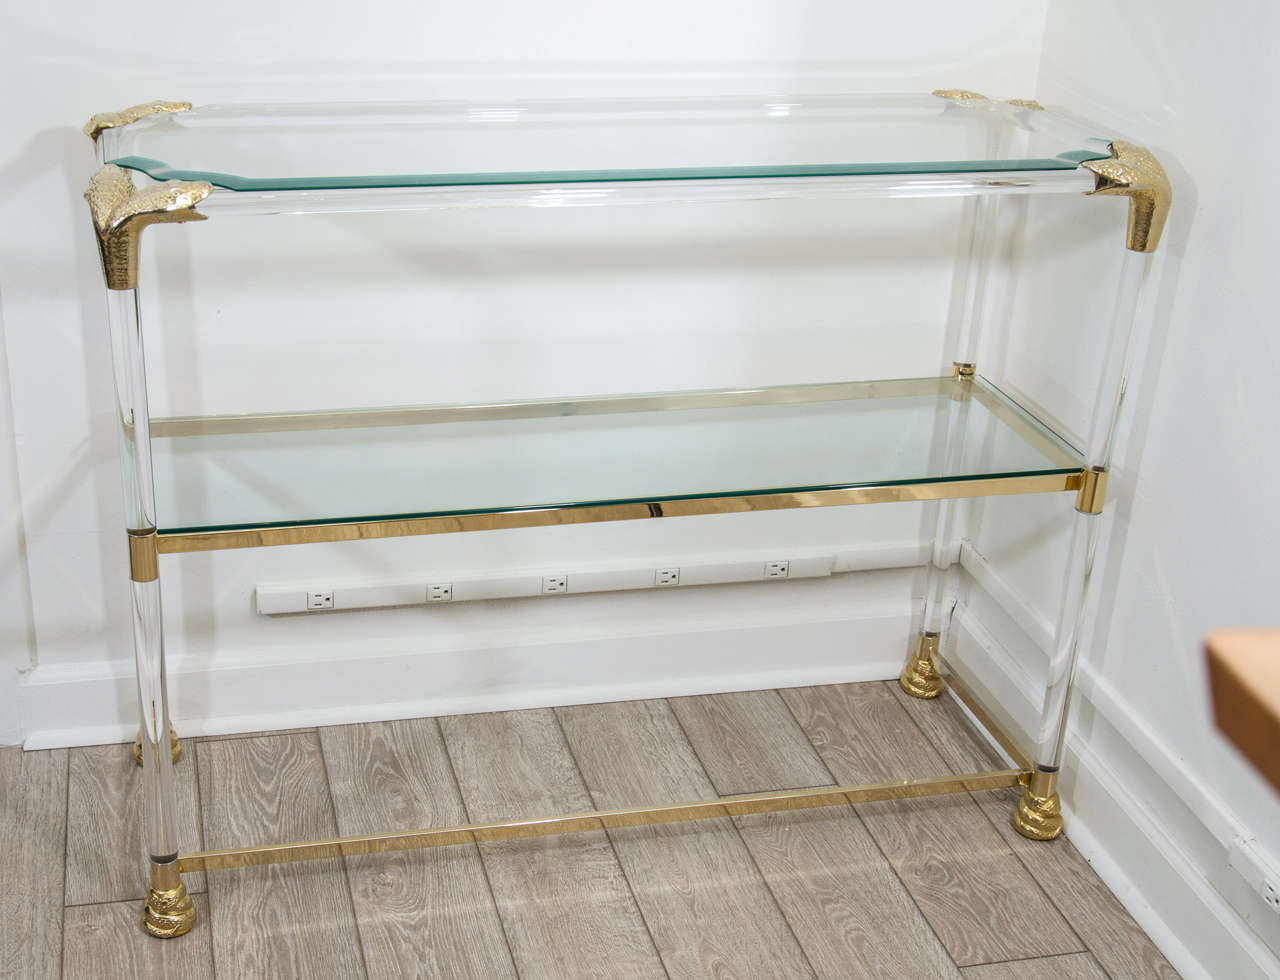 Lucite and brass étagère featuring snake head details and glass shelves.